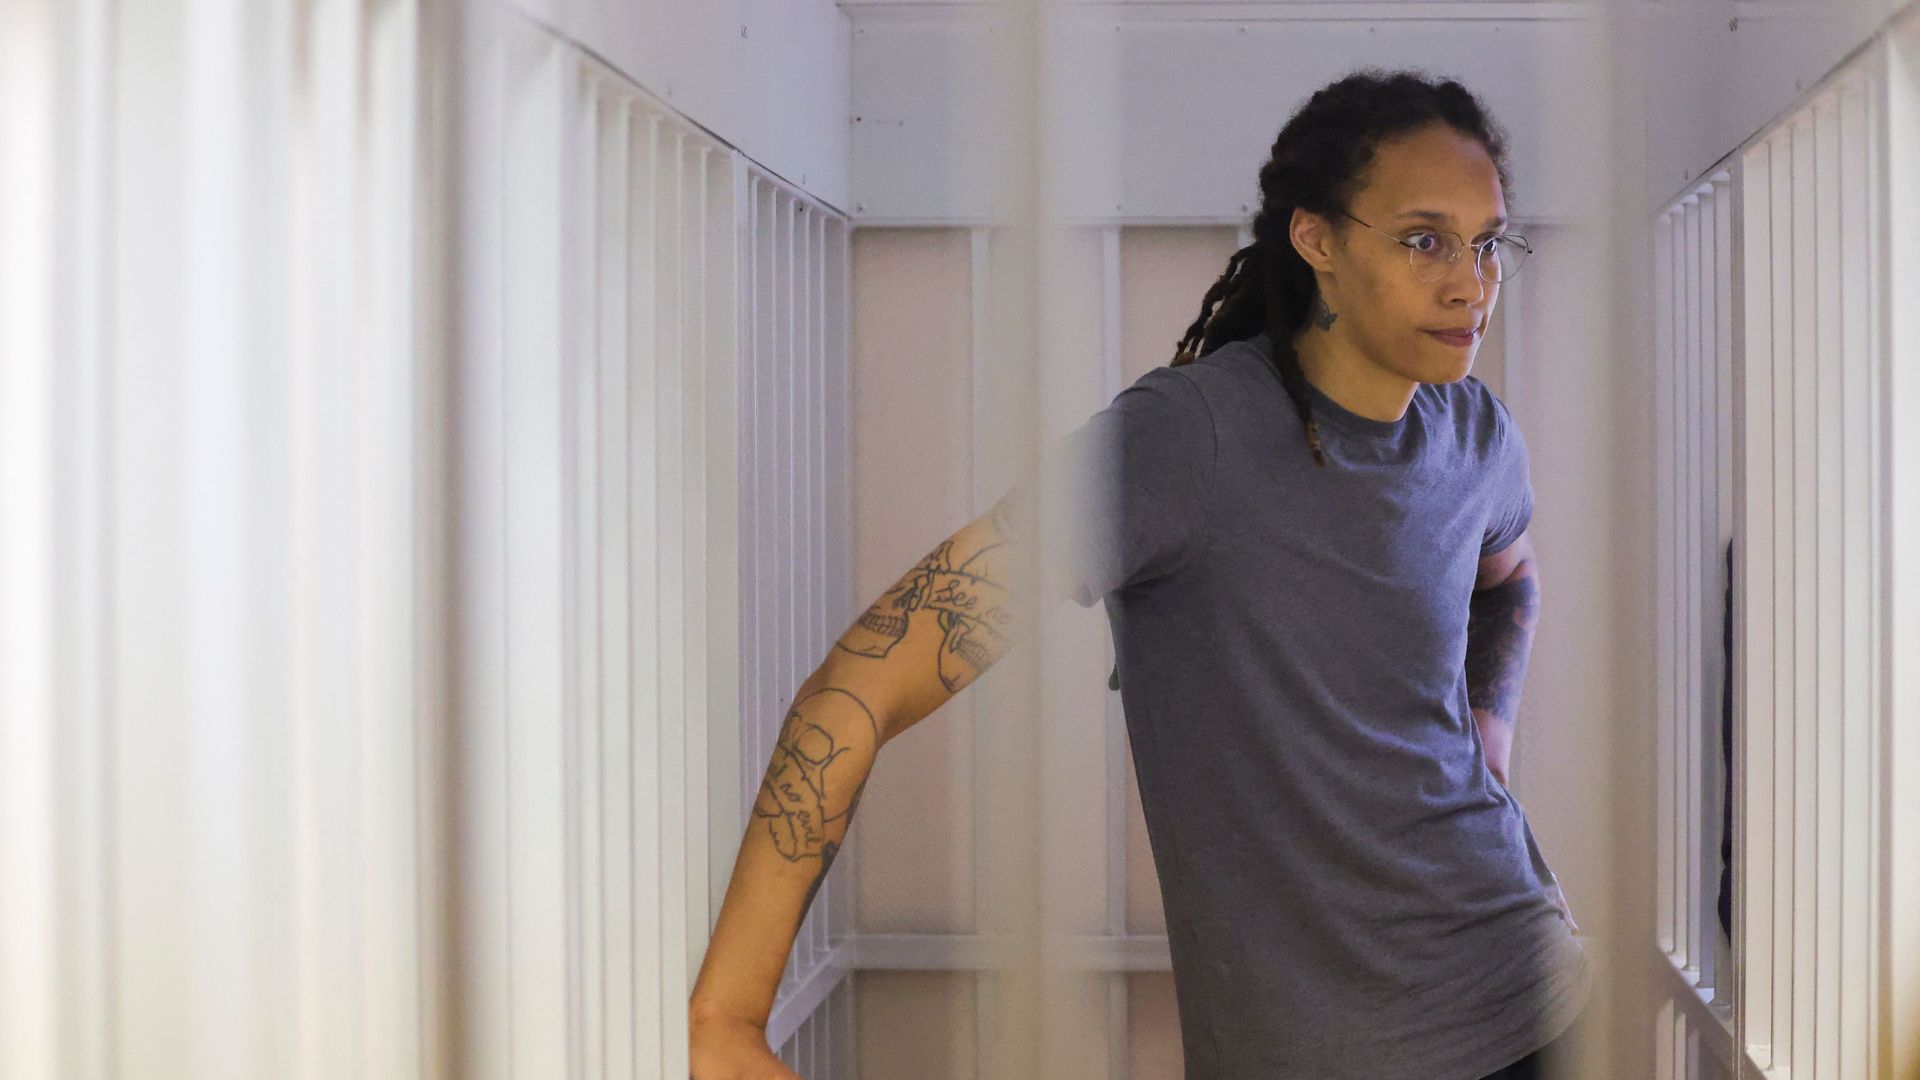 US' Women's National Basketball Association (WNBA) basketball player Brittney Griner inside a defendants' cage during a hearing in Khimki outside Moscow, on August 4, 2022